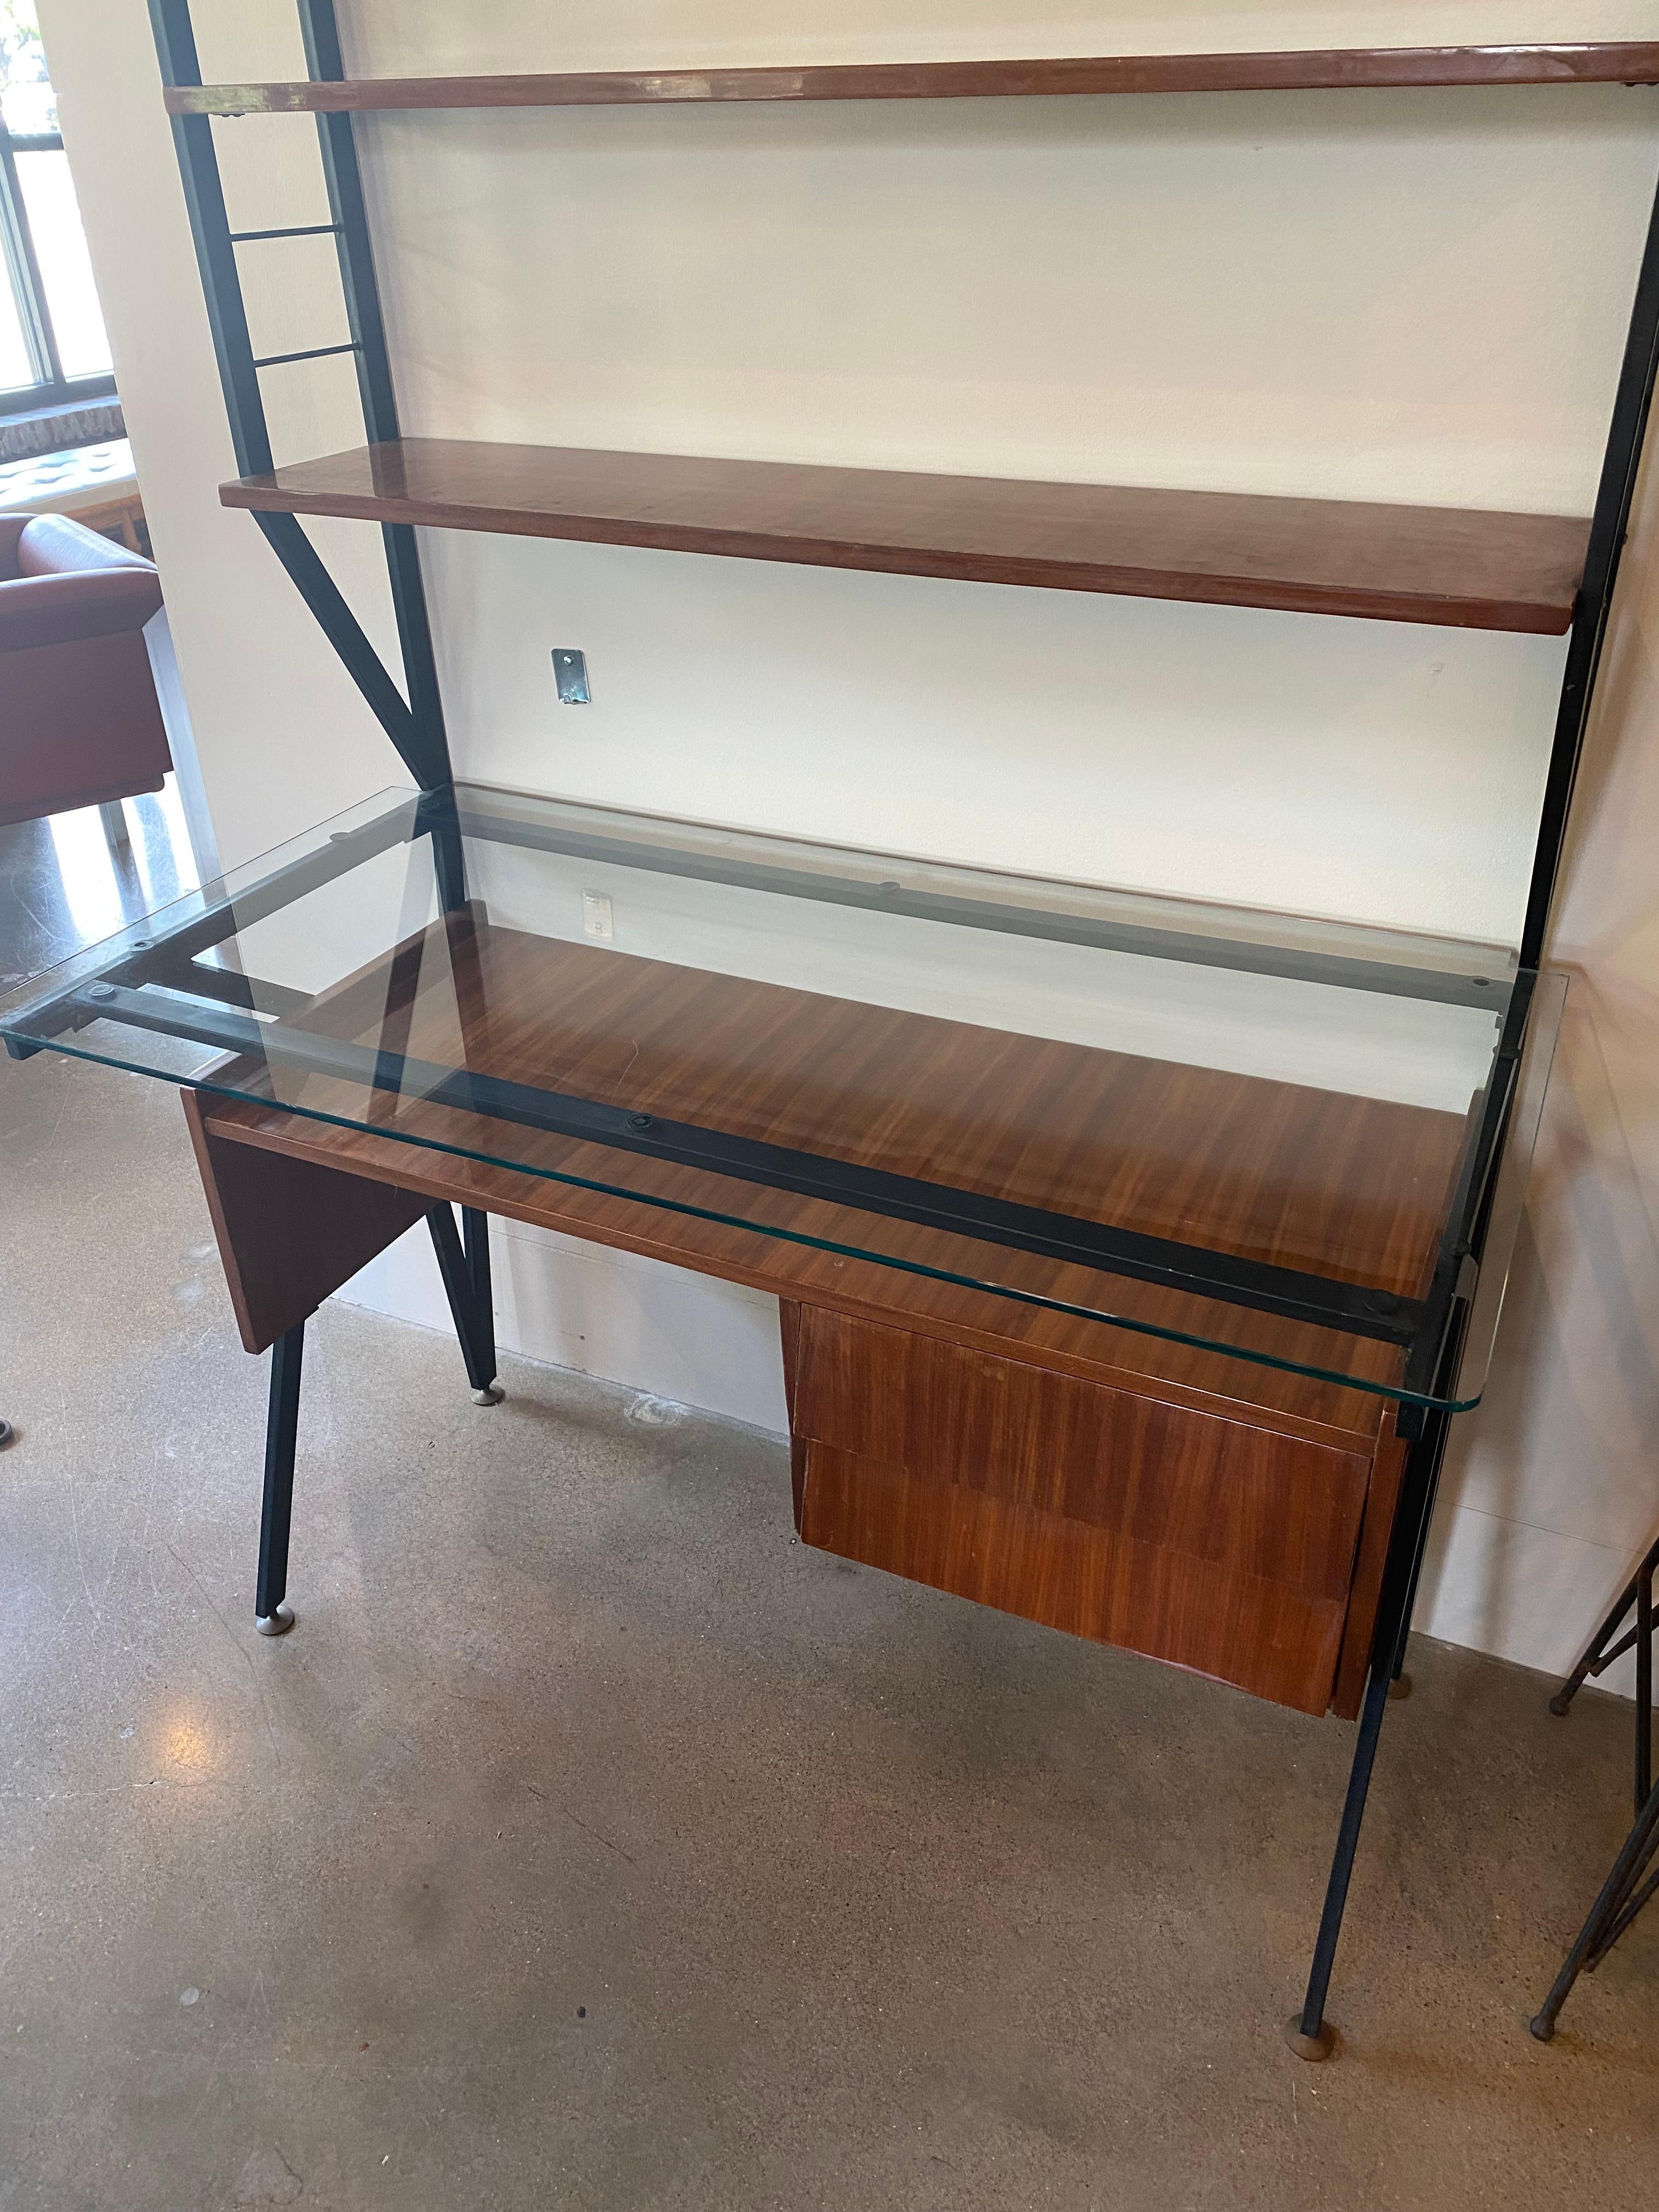 Italian Mid-Century Modern Desk with Shelves, Style of Ico Parisi For Sale 5